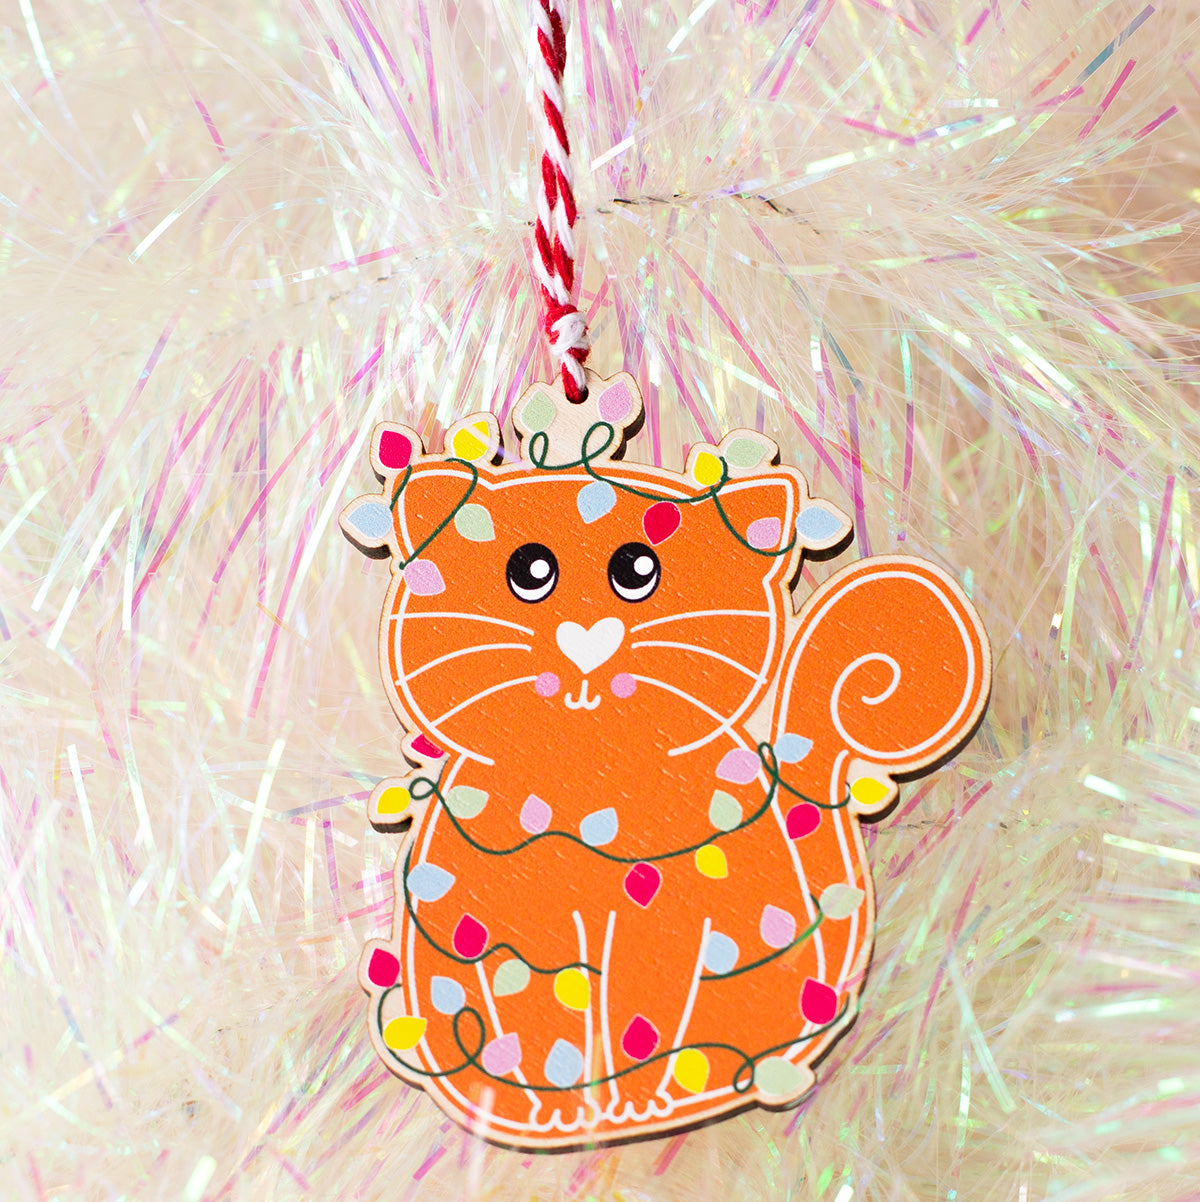 Christmas tree wooden ornament of a cat illustrated in a gingerbread style with fairy lights